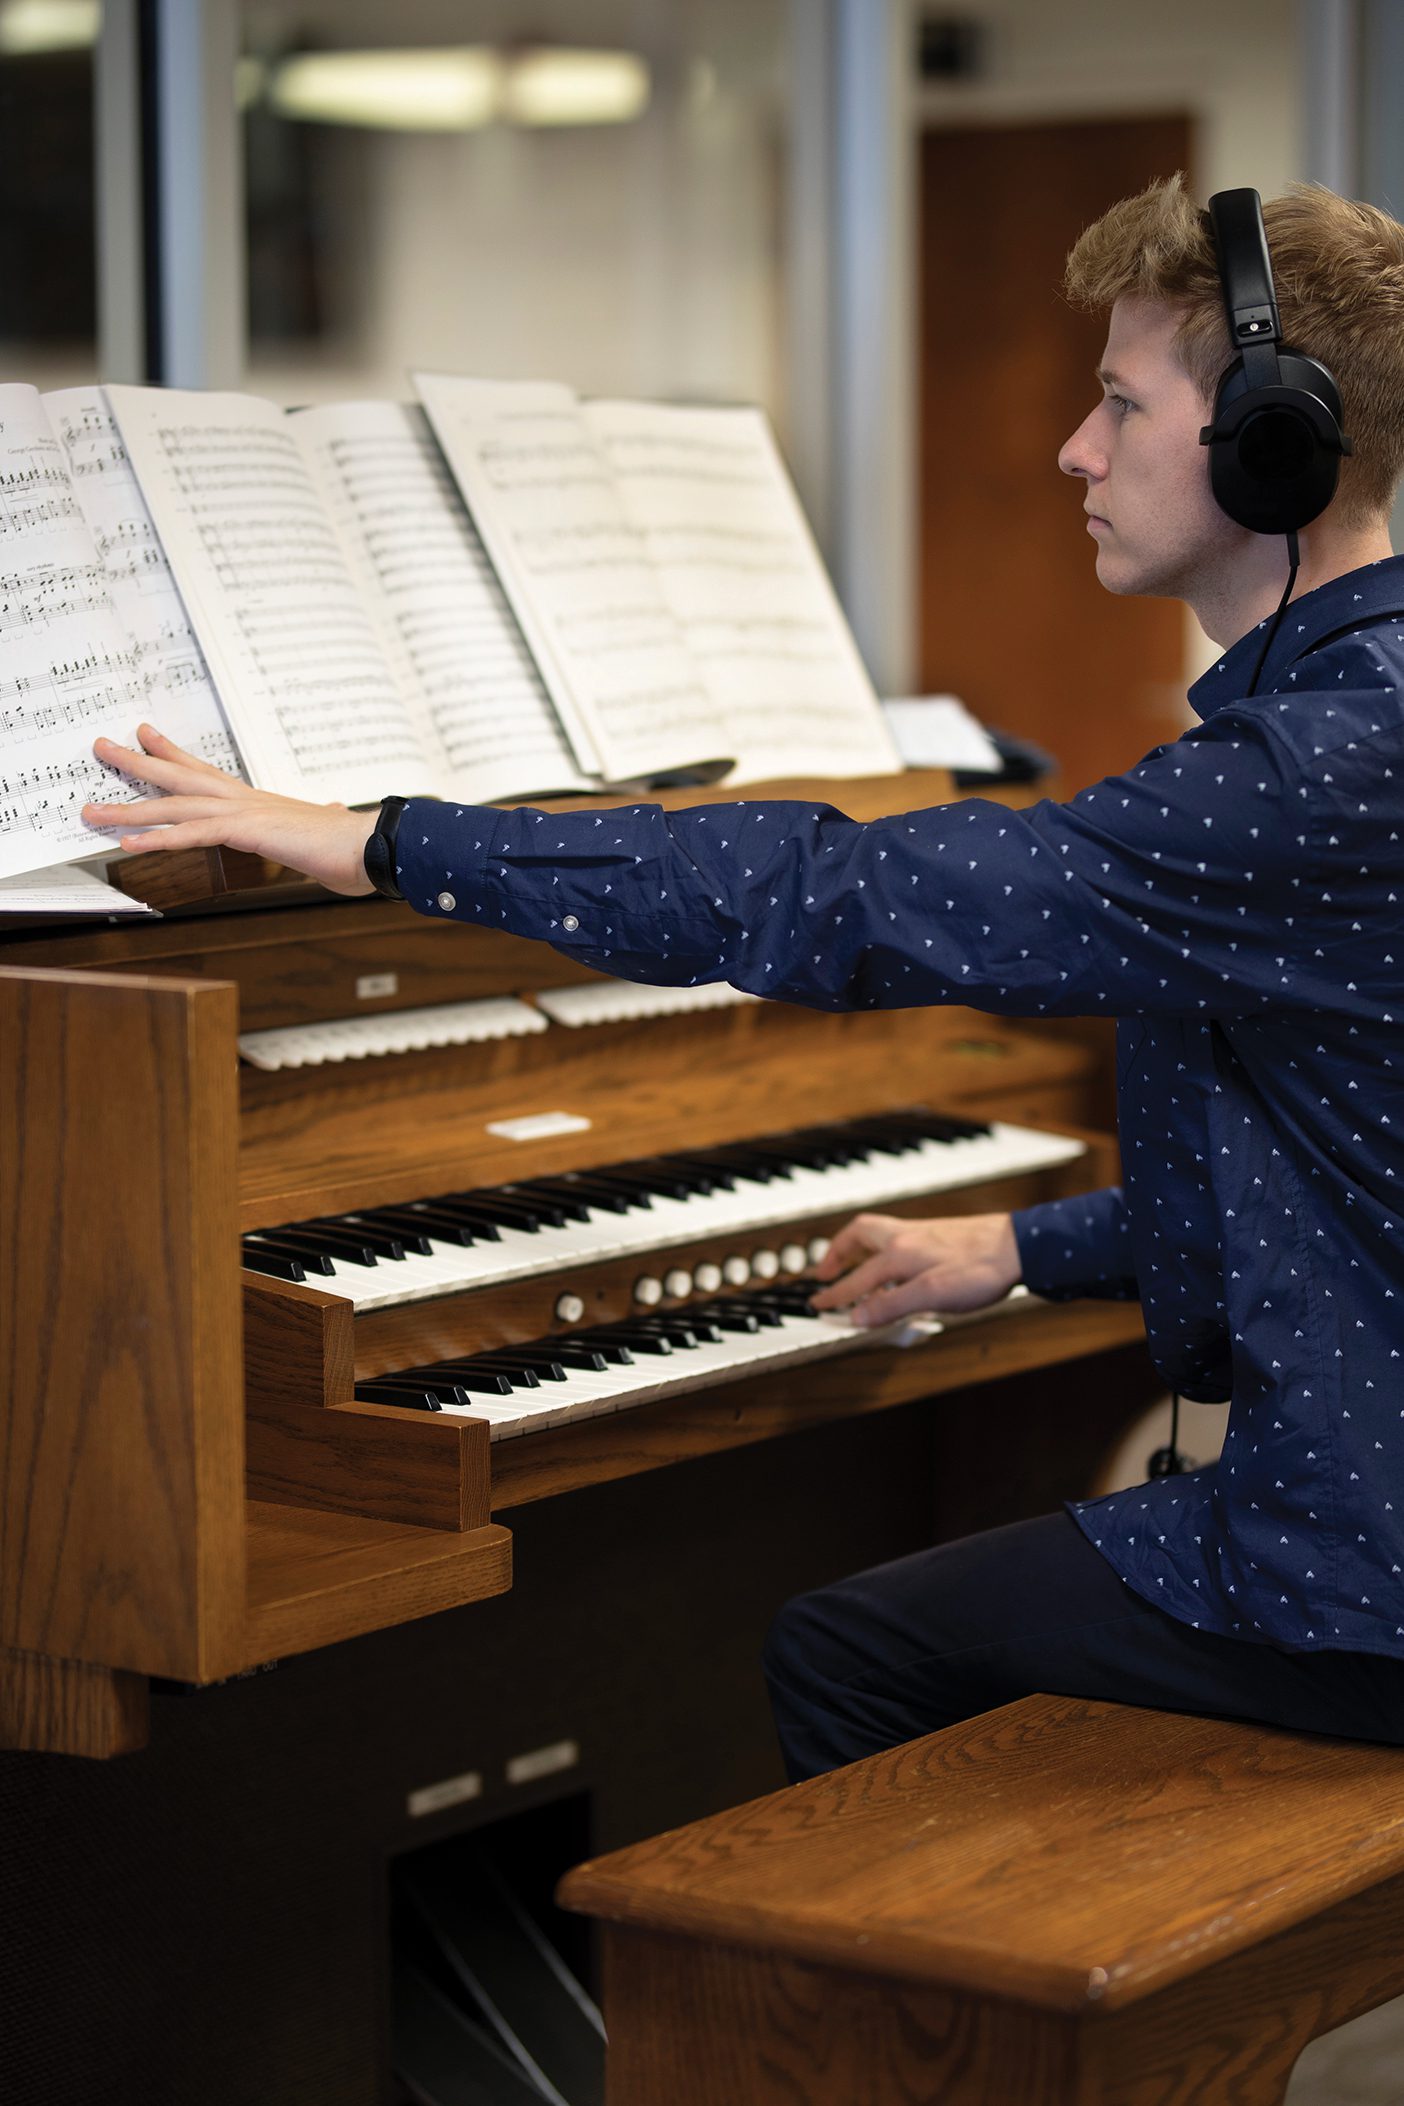 While wearing headphones, a student practices on an electric organ.